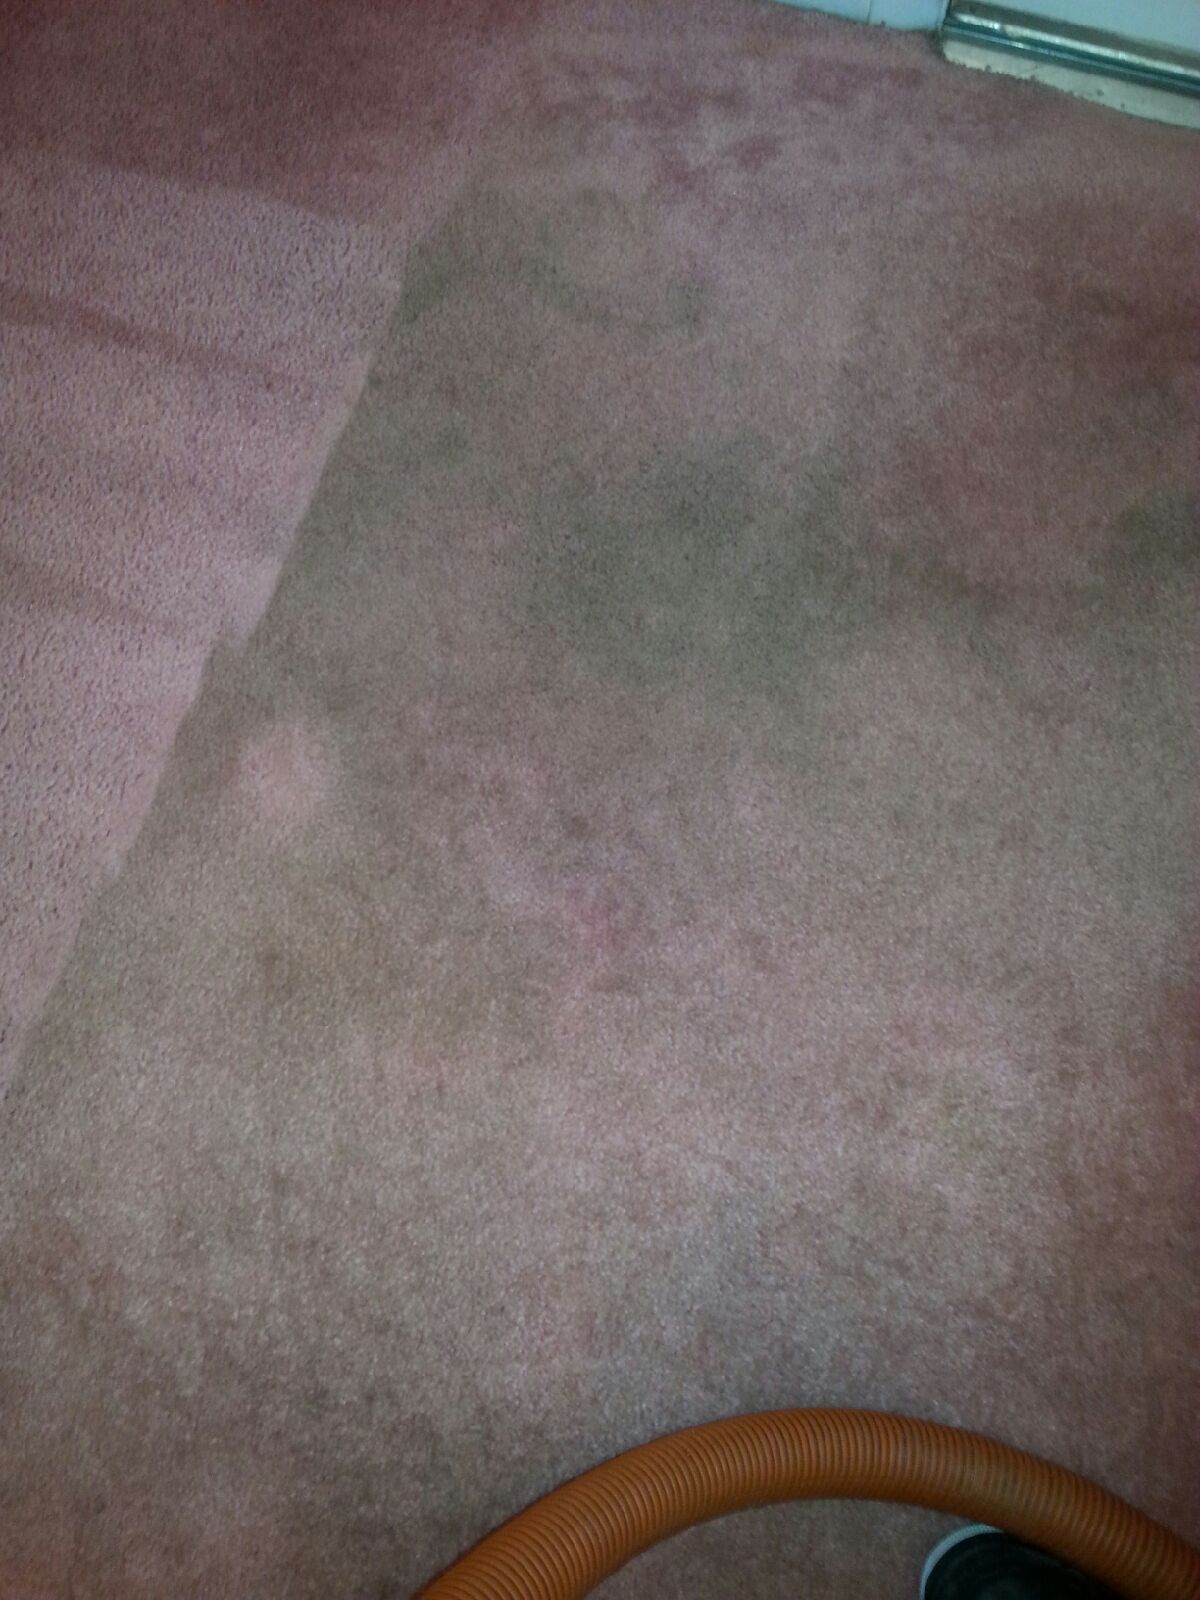 Cherry Hill Carpet Cleaner. What Makes Carpet Look Dirty?